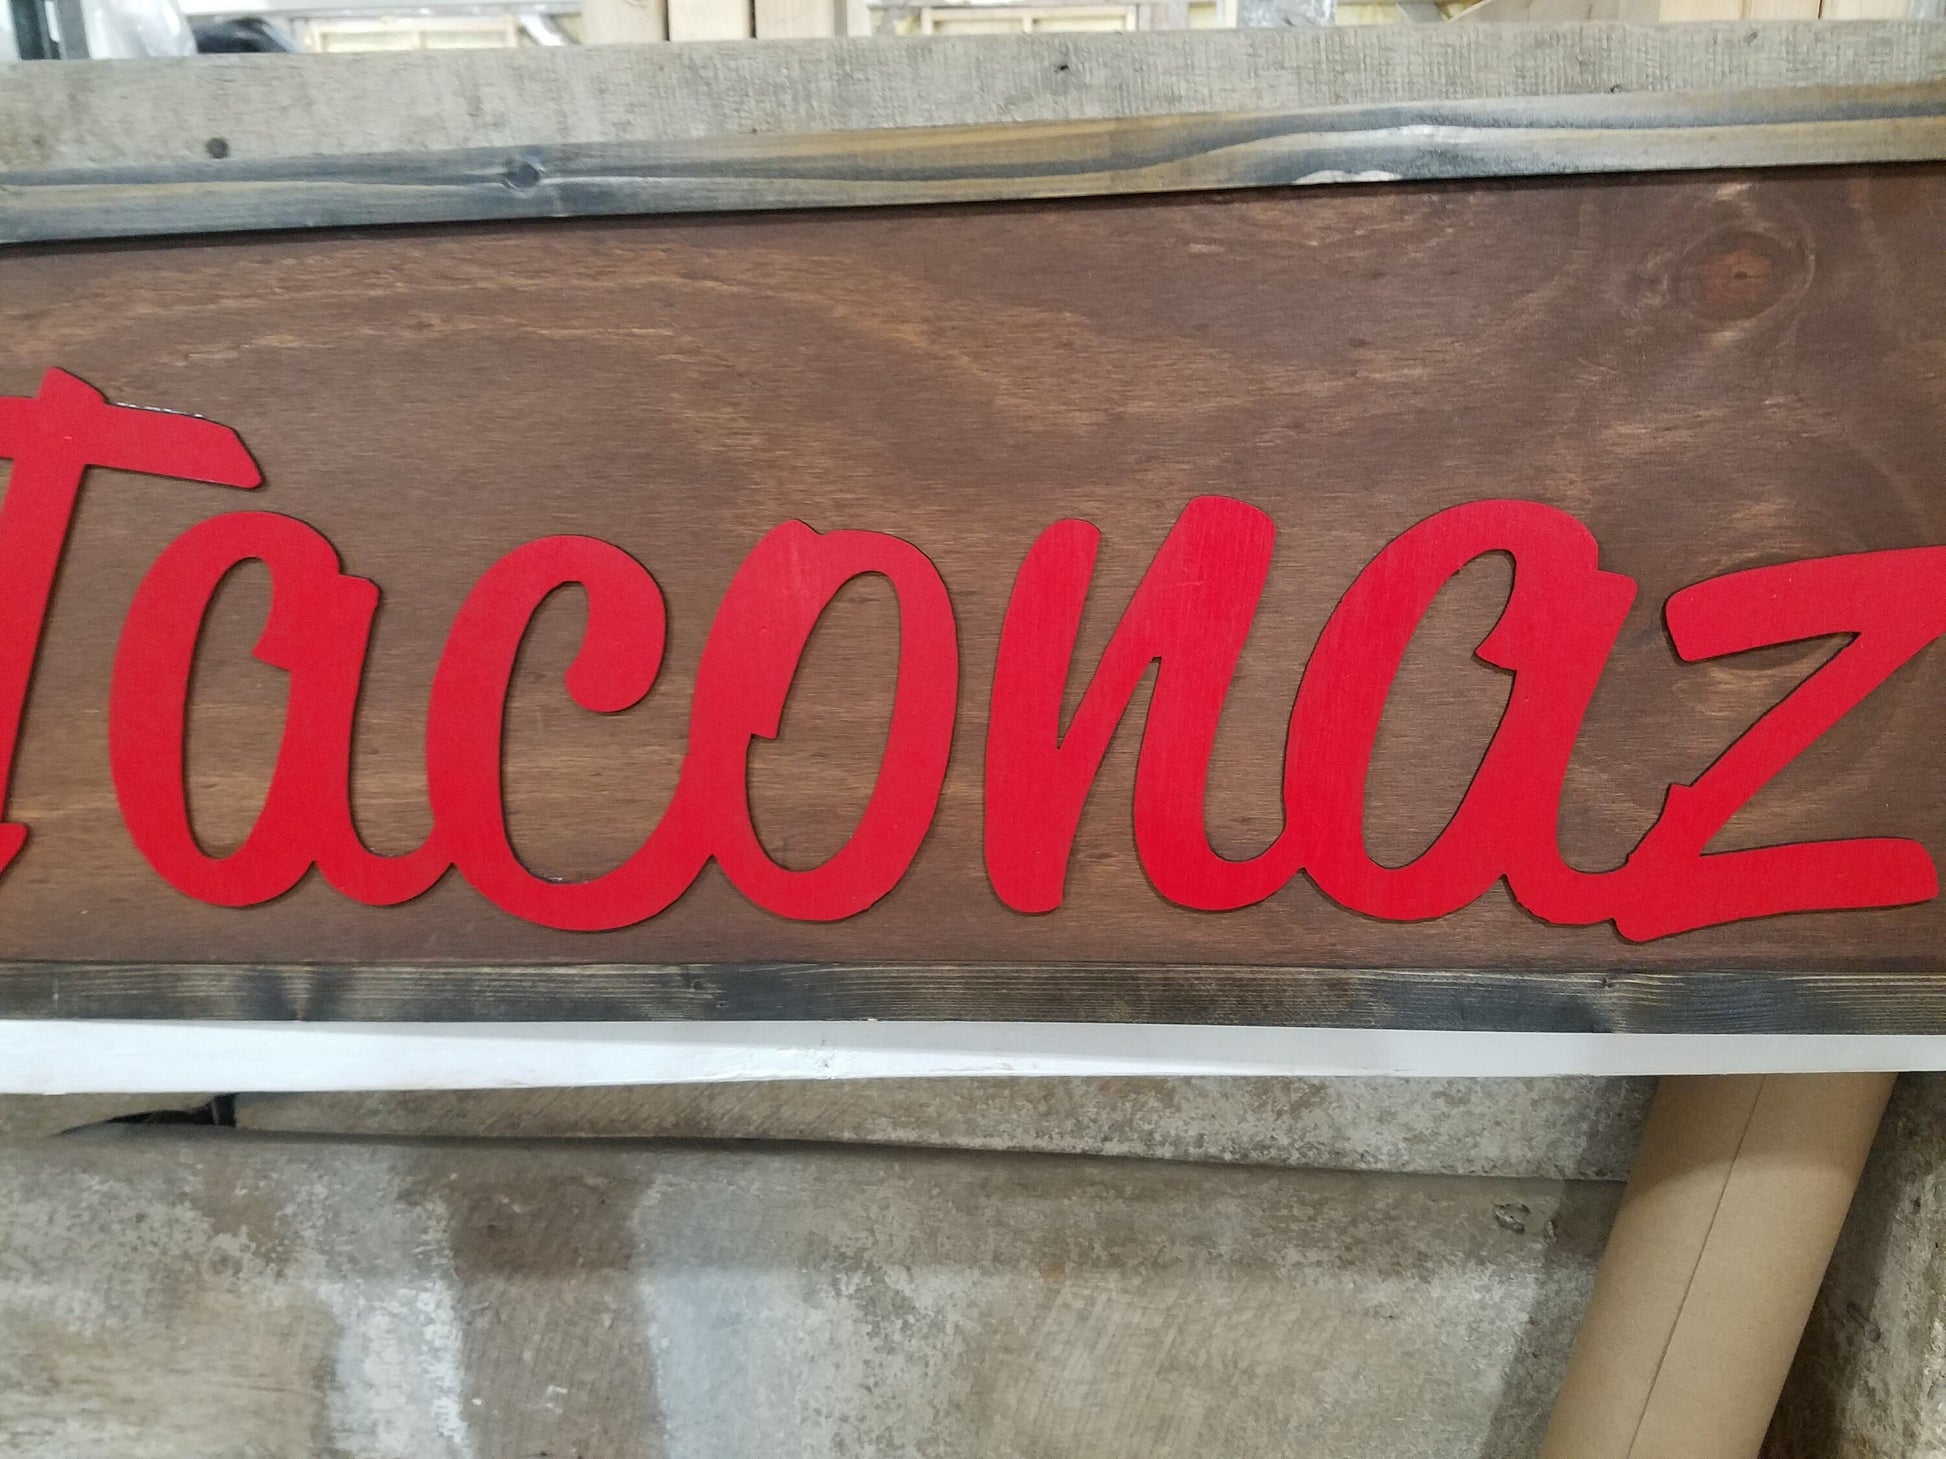 Restaurant Wood Sign Large Custom Business Sign, Taco, Restaurant, Over-sized Rustic Business Logo, Wood, Laser Cut Out, 3D, Extra Large